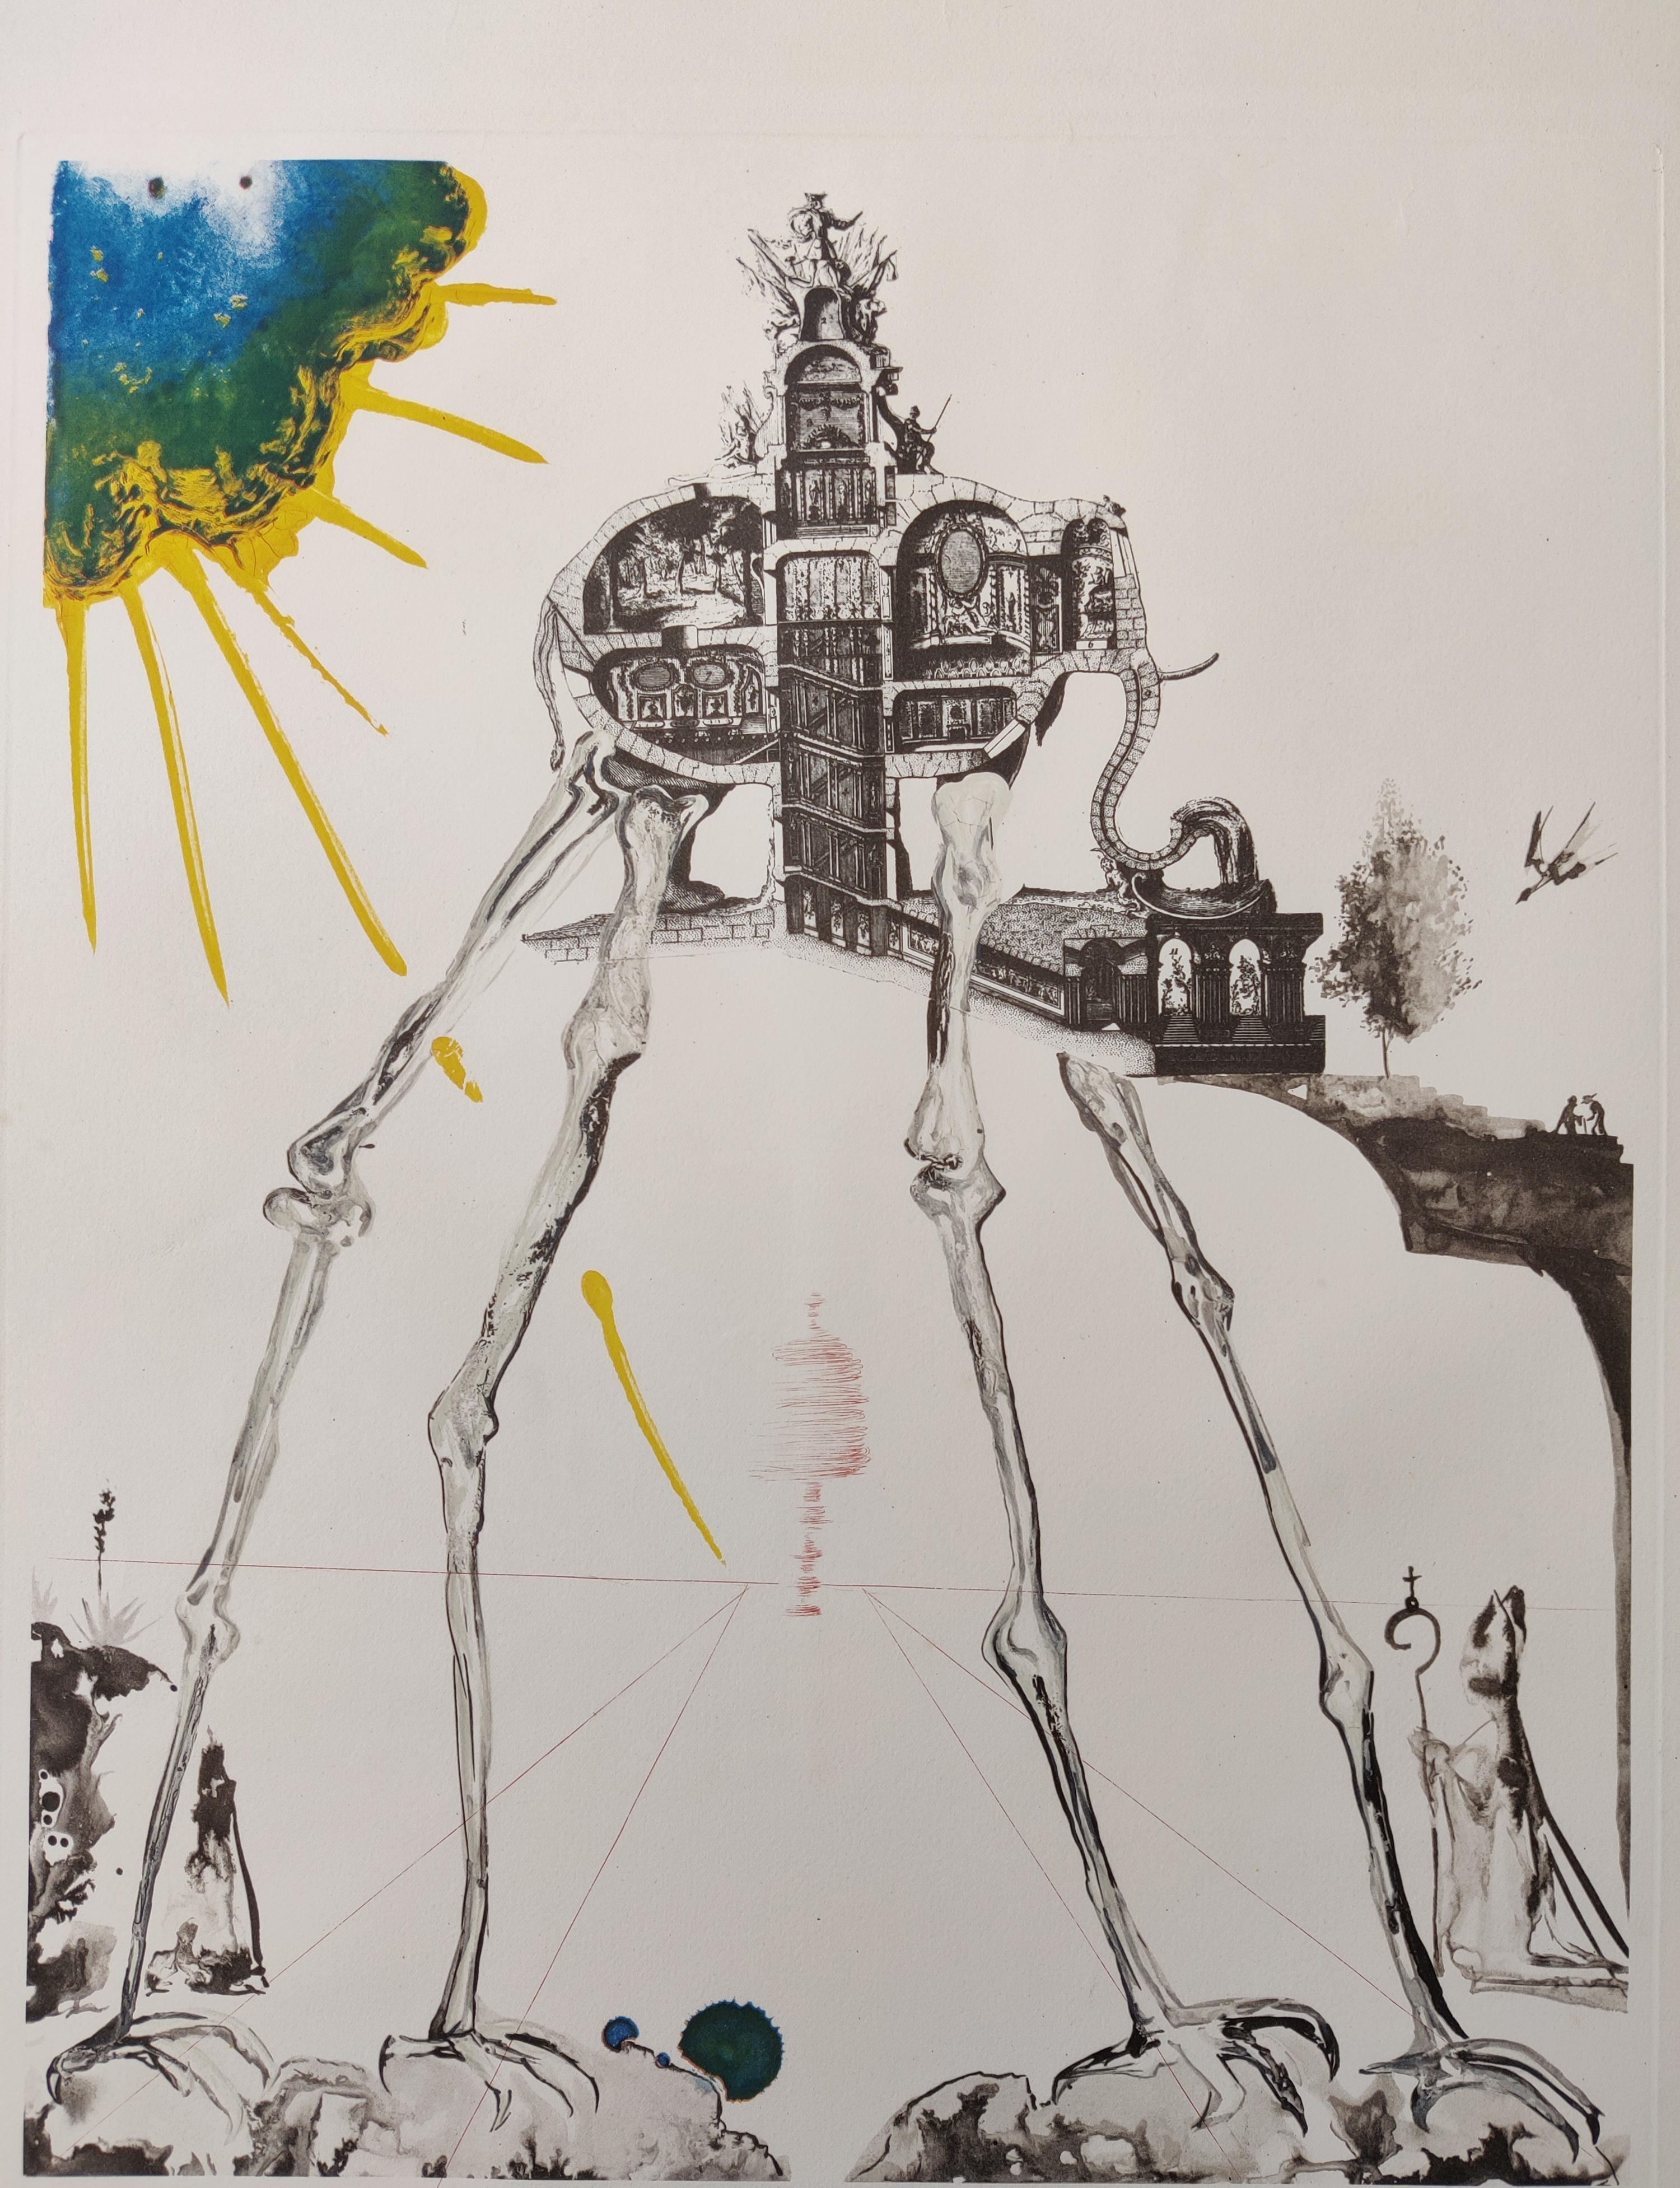 Salvador Dali  
Space Elephant from Memories of Surrealism, 1971
Lithograph with etching in colors on Arches paper
Hand signed lower right
Numbered F 16/175
Reference Field 71-15 D